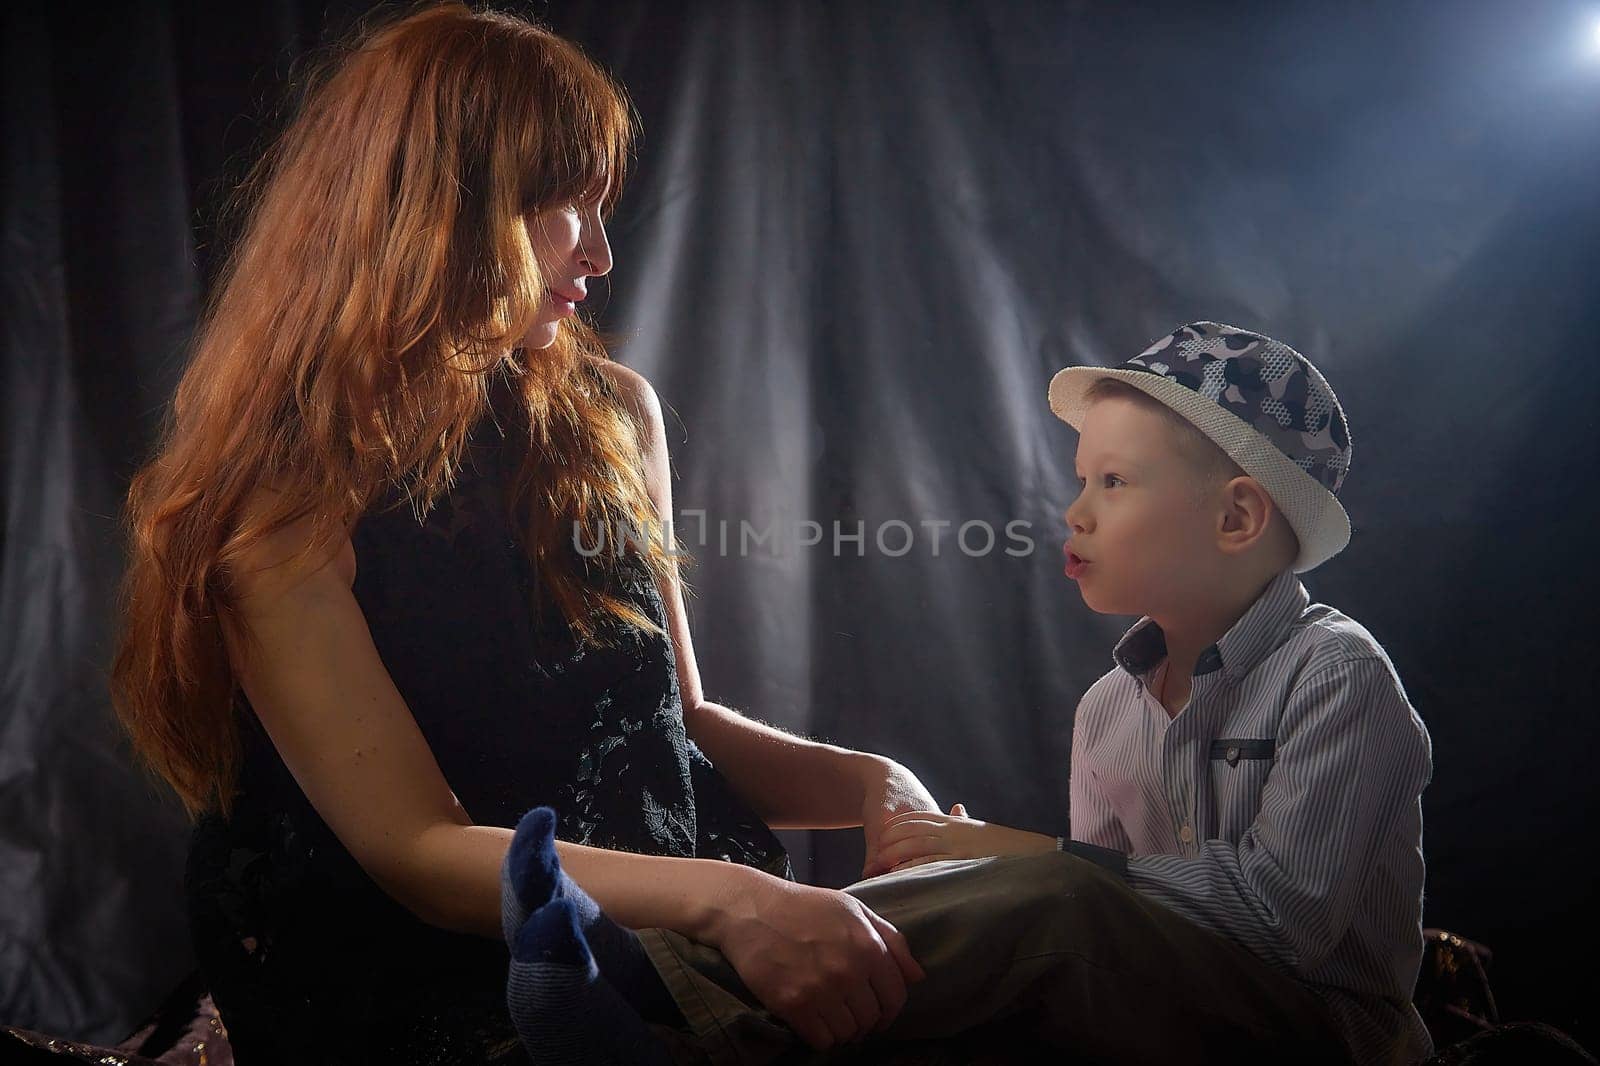 Woman with a boy in hat. Mom with son on a dark background. Family portrait with mother with red hair and boy having fun together by keleny